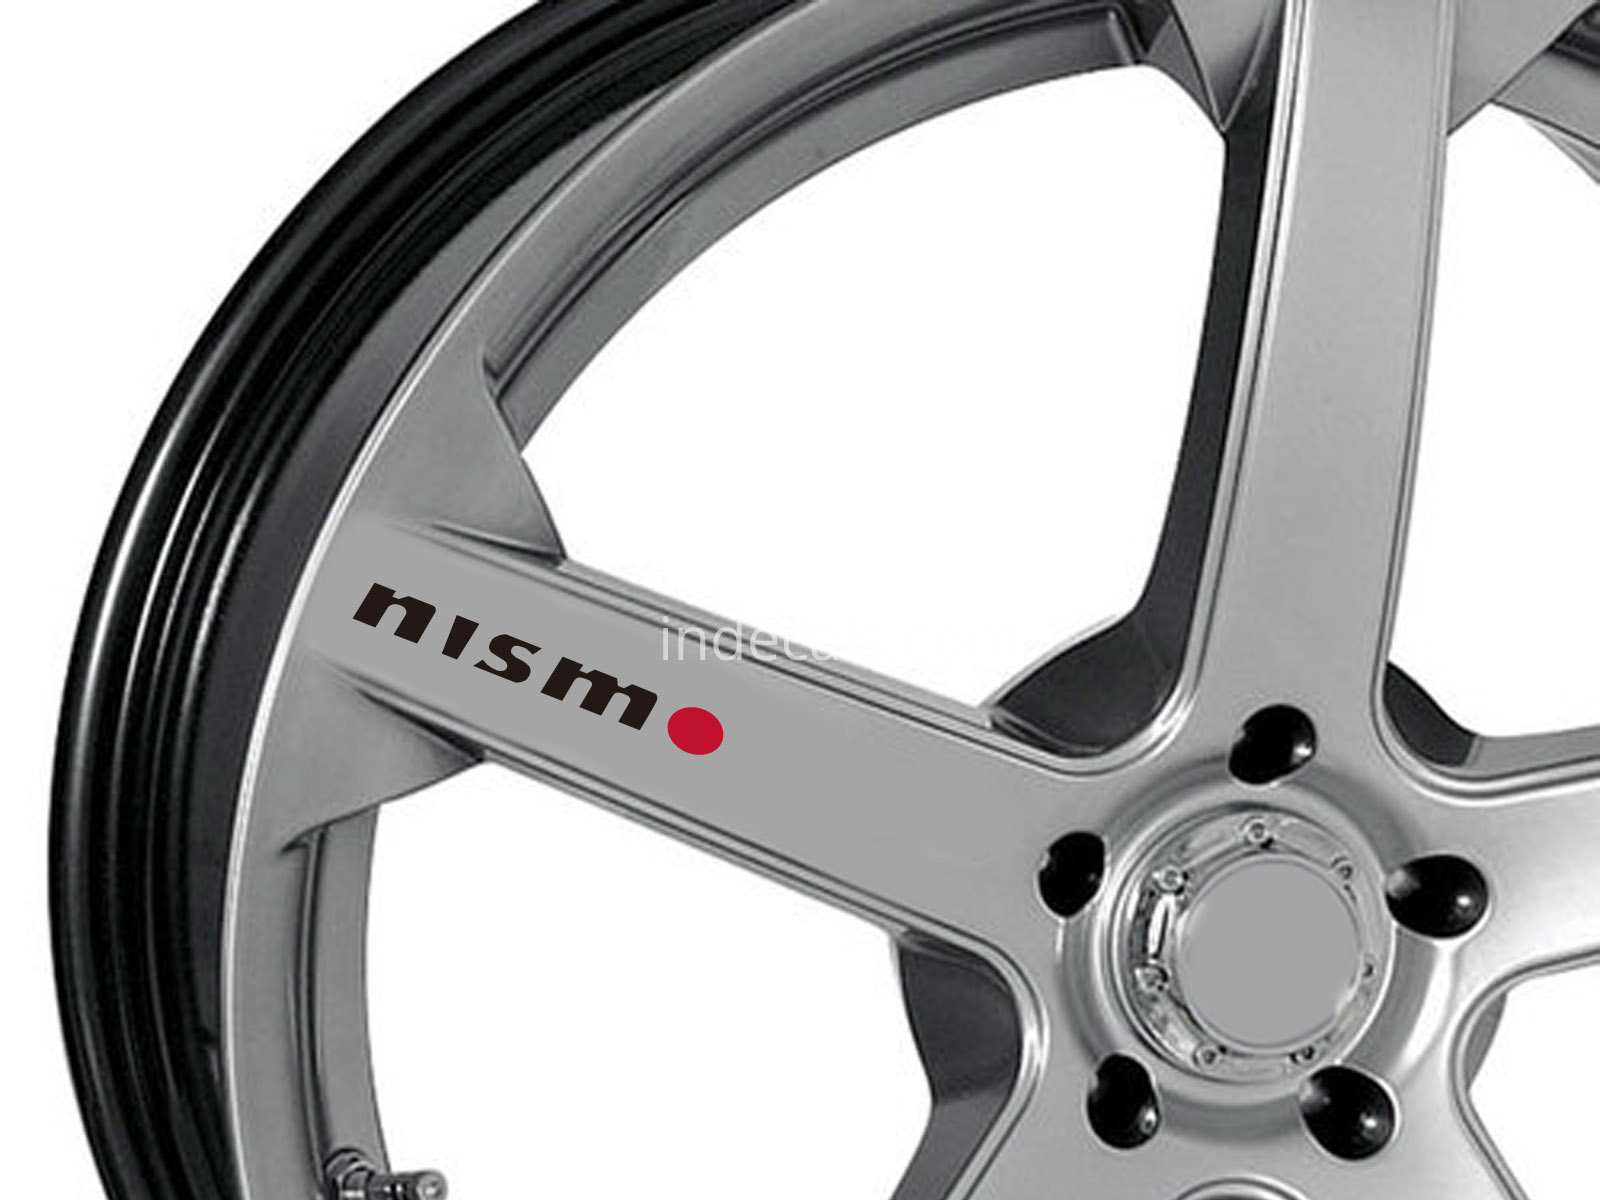 6 x Nismo Stickers for Wheels - Black